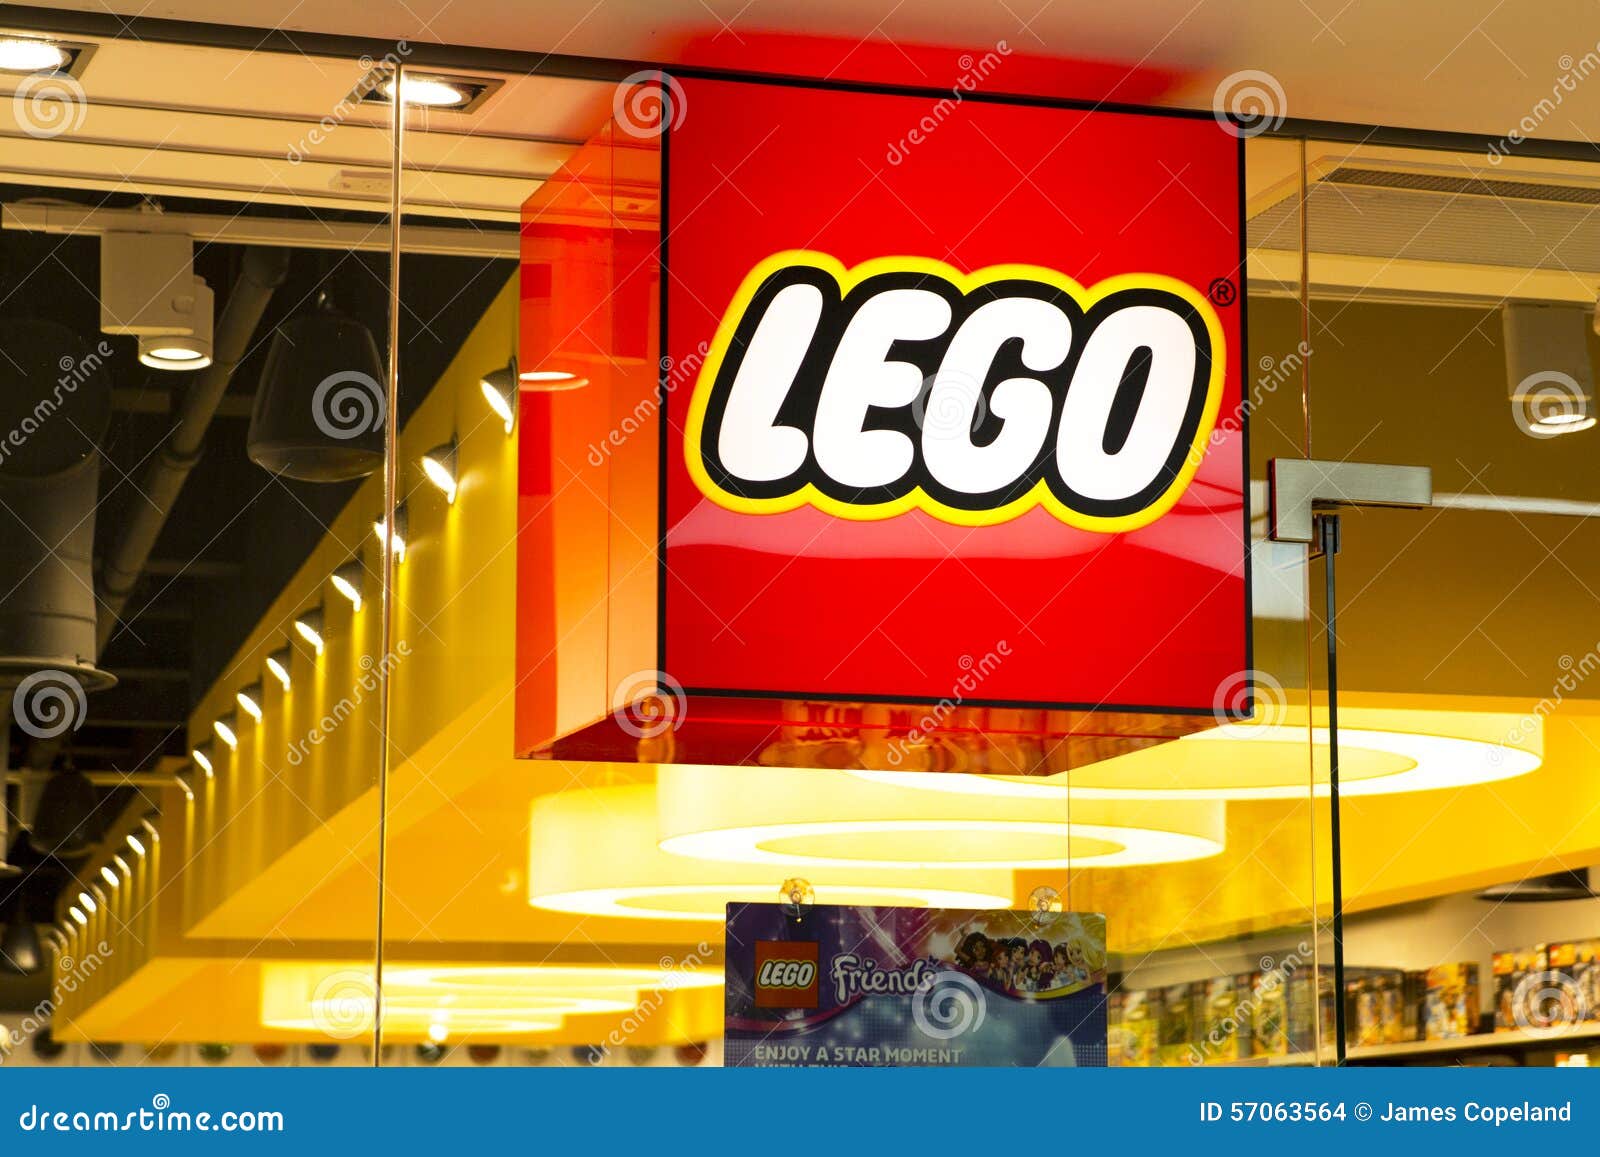 Lego Shop stock image. Image of front, store - 57063564